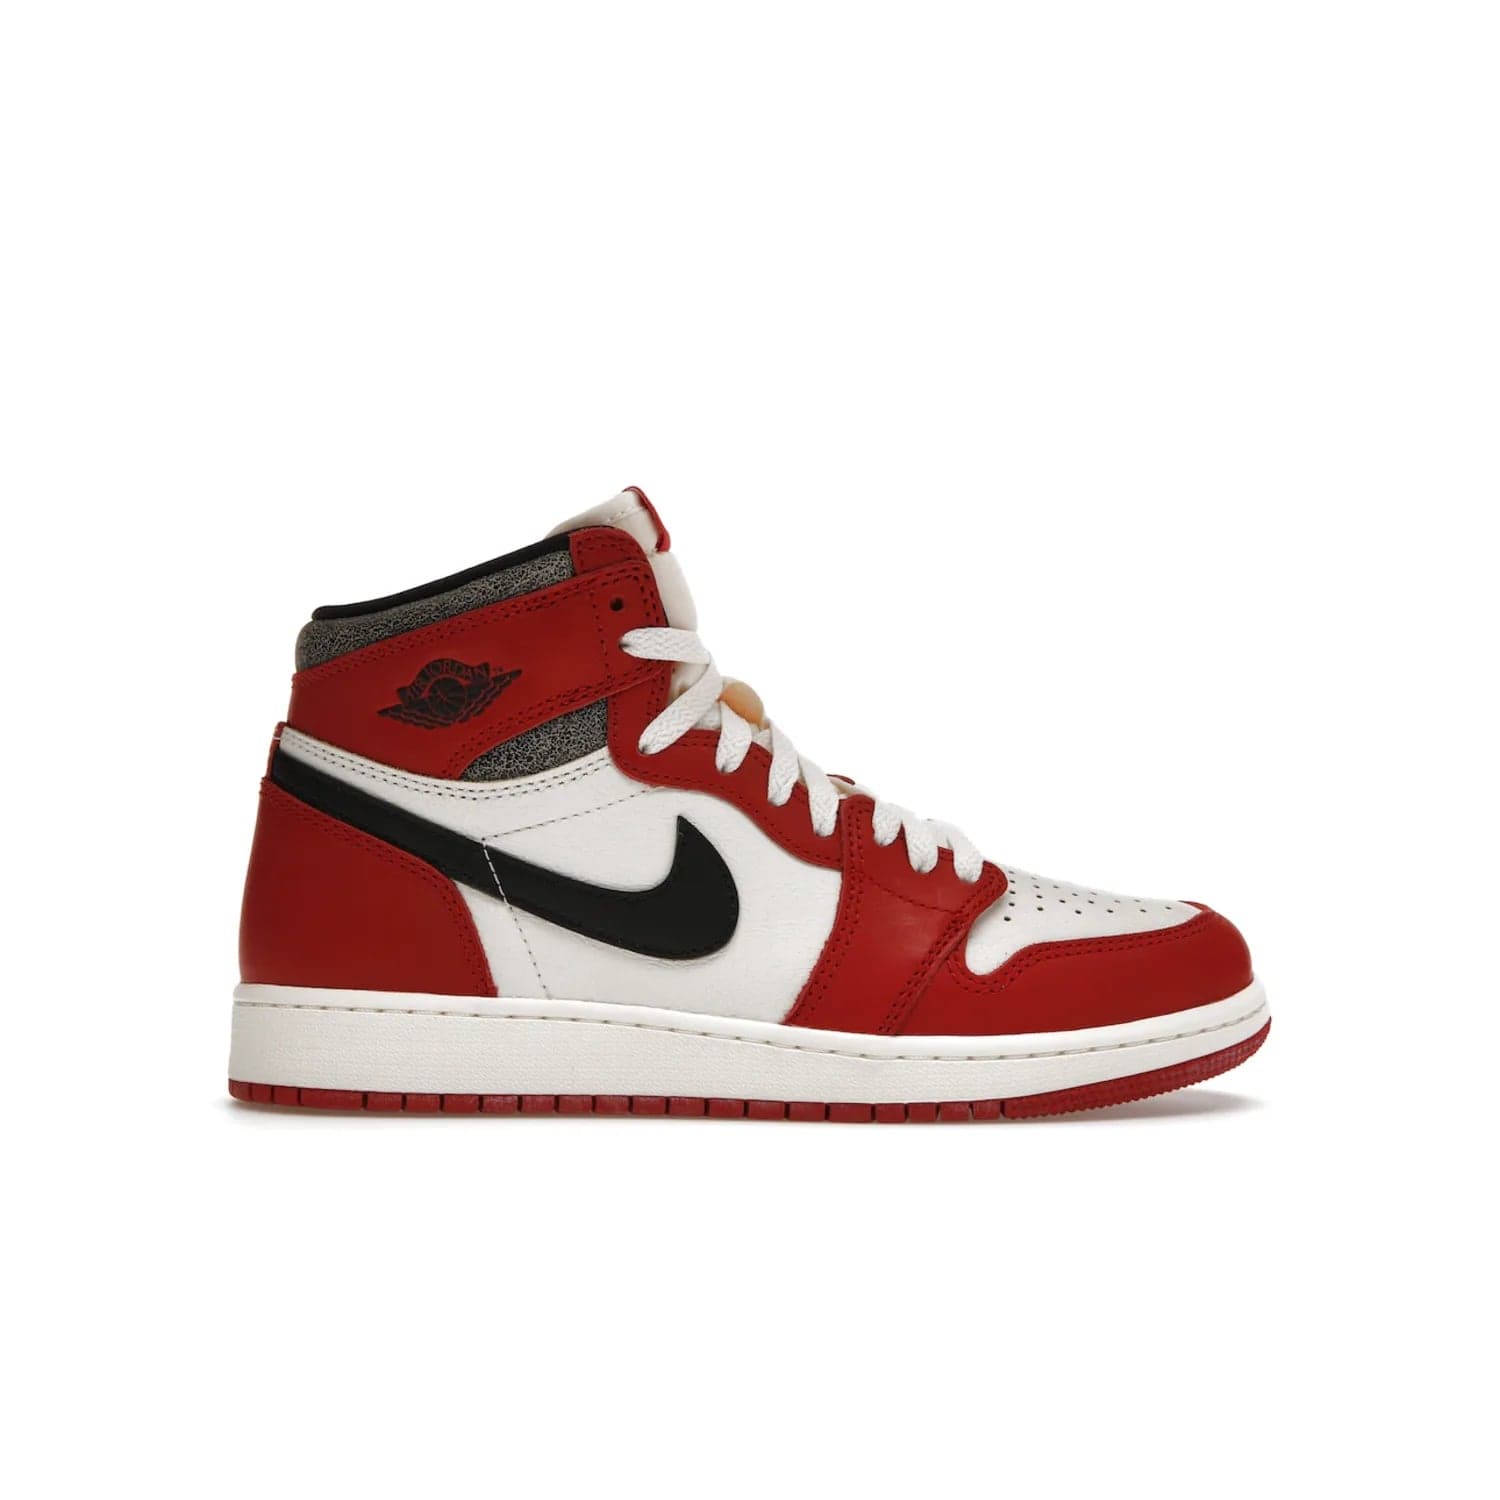 Jordan 1 Retro High OG Chicago Lost and Found (GS) - Image 1 - Only at www.BallersClubKickz.com - Grab the Air Jordan 1 Retro High OG Chicago Reimagined GS, presenting in classic 1985 silhouette. Varsity Red, Black, Muslin and Sail hues, featuring Nike Air branding, Wings on the collars and printed insoles. Don't miss out when it releases 19th Nov 2022.